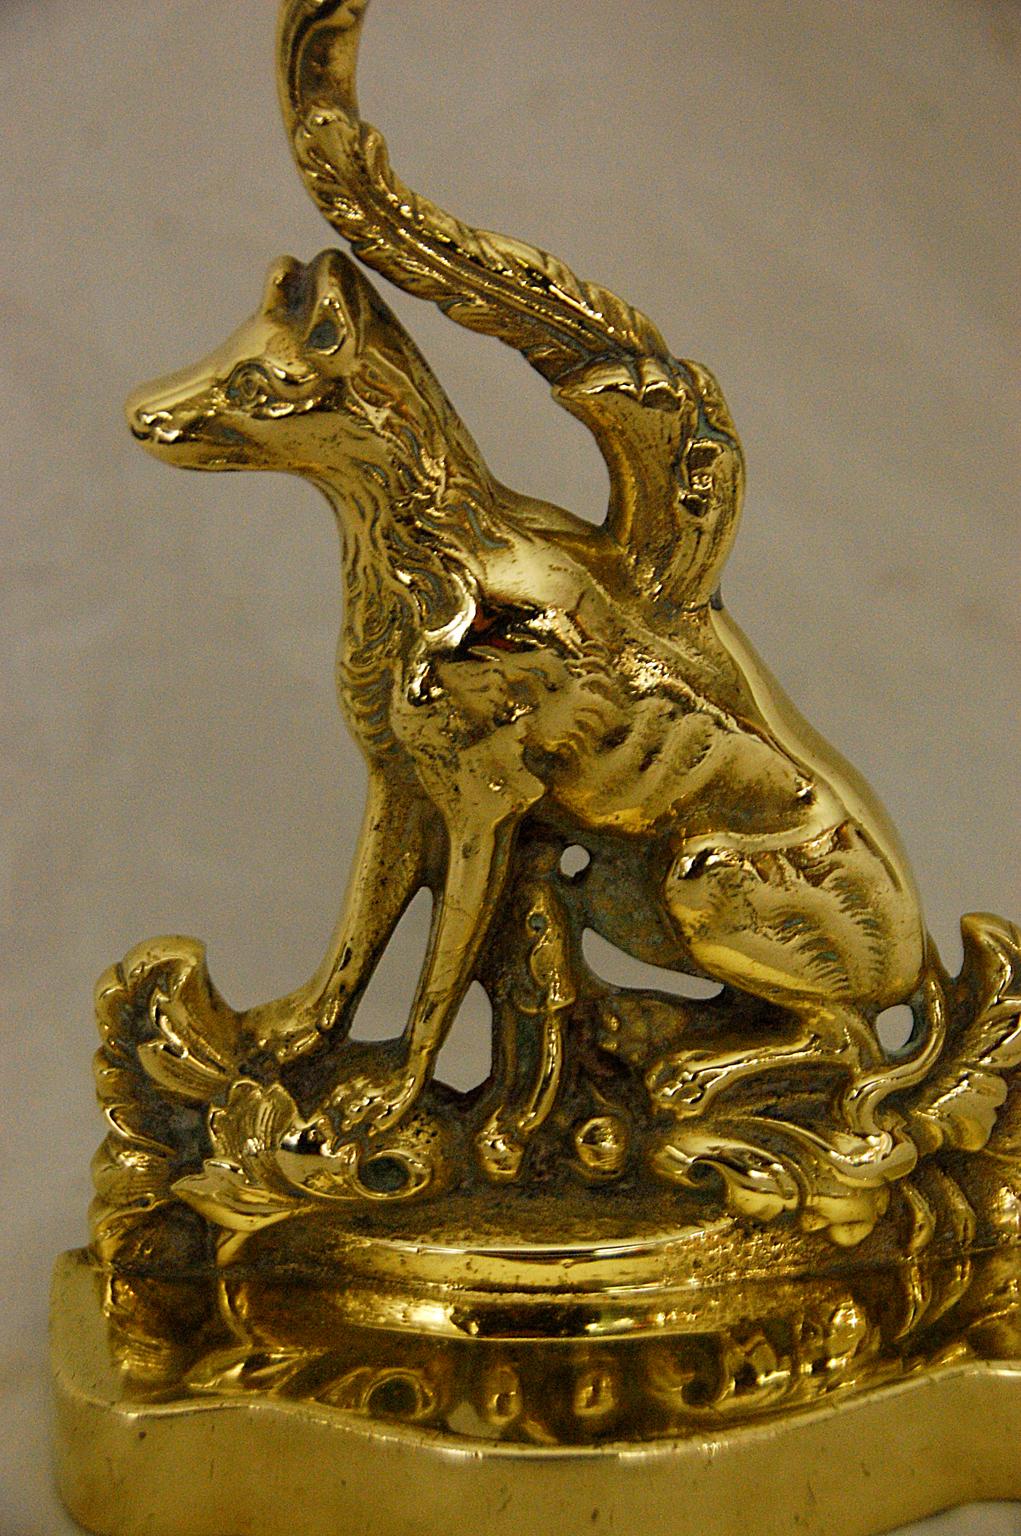 English 19th century cast brass sitting dog doorstop with vine handle and lead weighted brass base. This crisply cast dog doorstop is exceptionally easy to move with its brass leaf and vine handle. The serpentine cast brass base is filled with lead